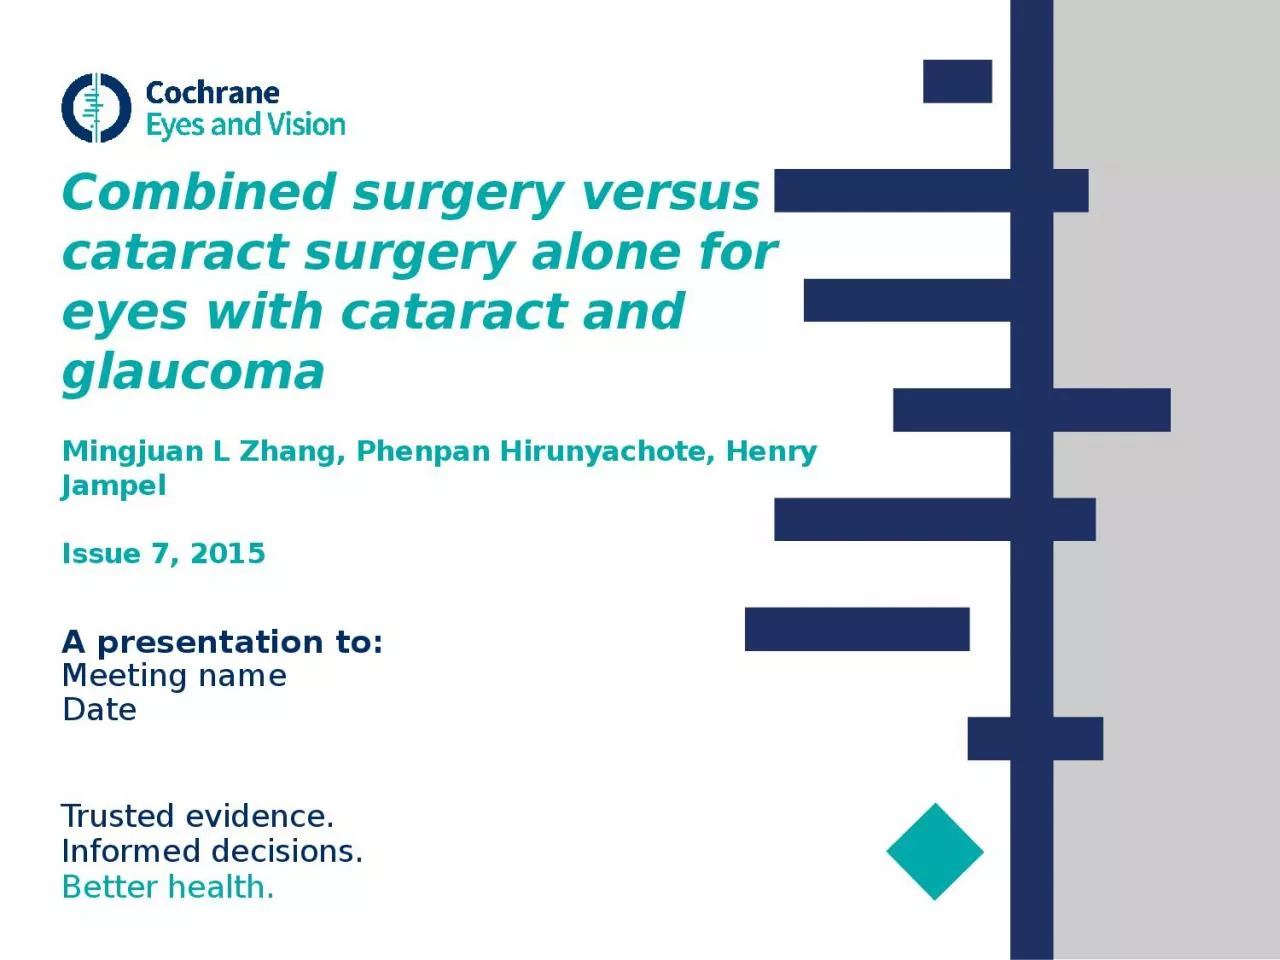 Combined surgery versus cataract surgery alone for eyes with cataract and glaucoma